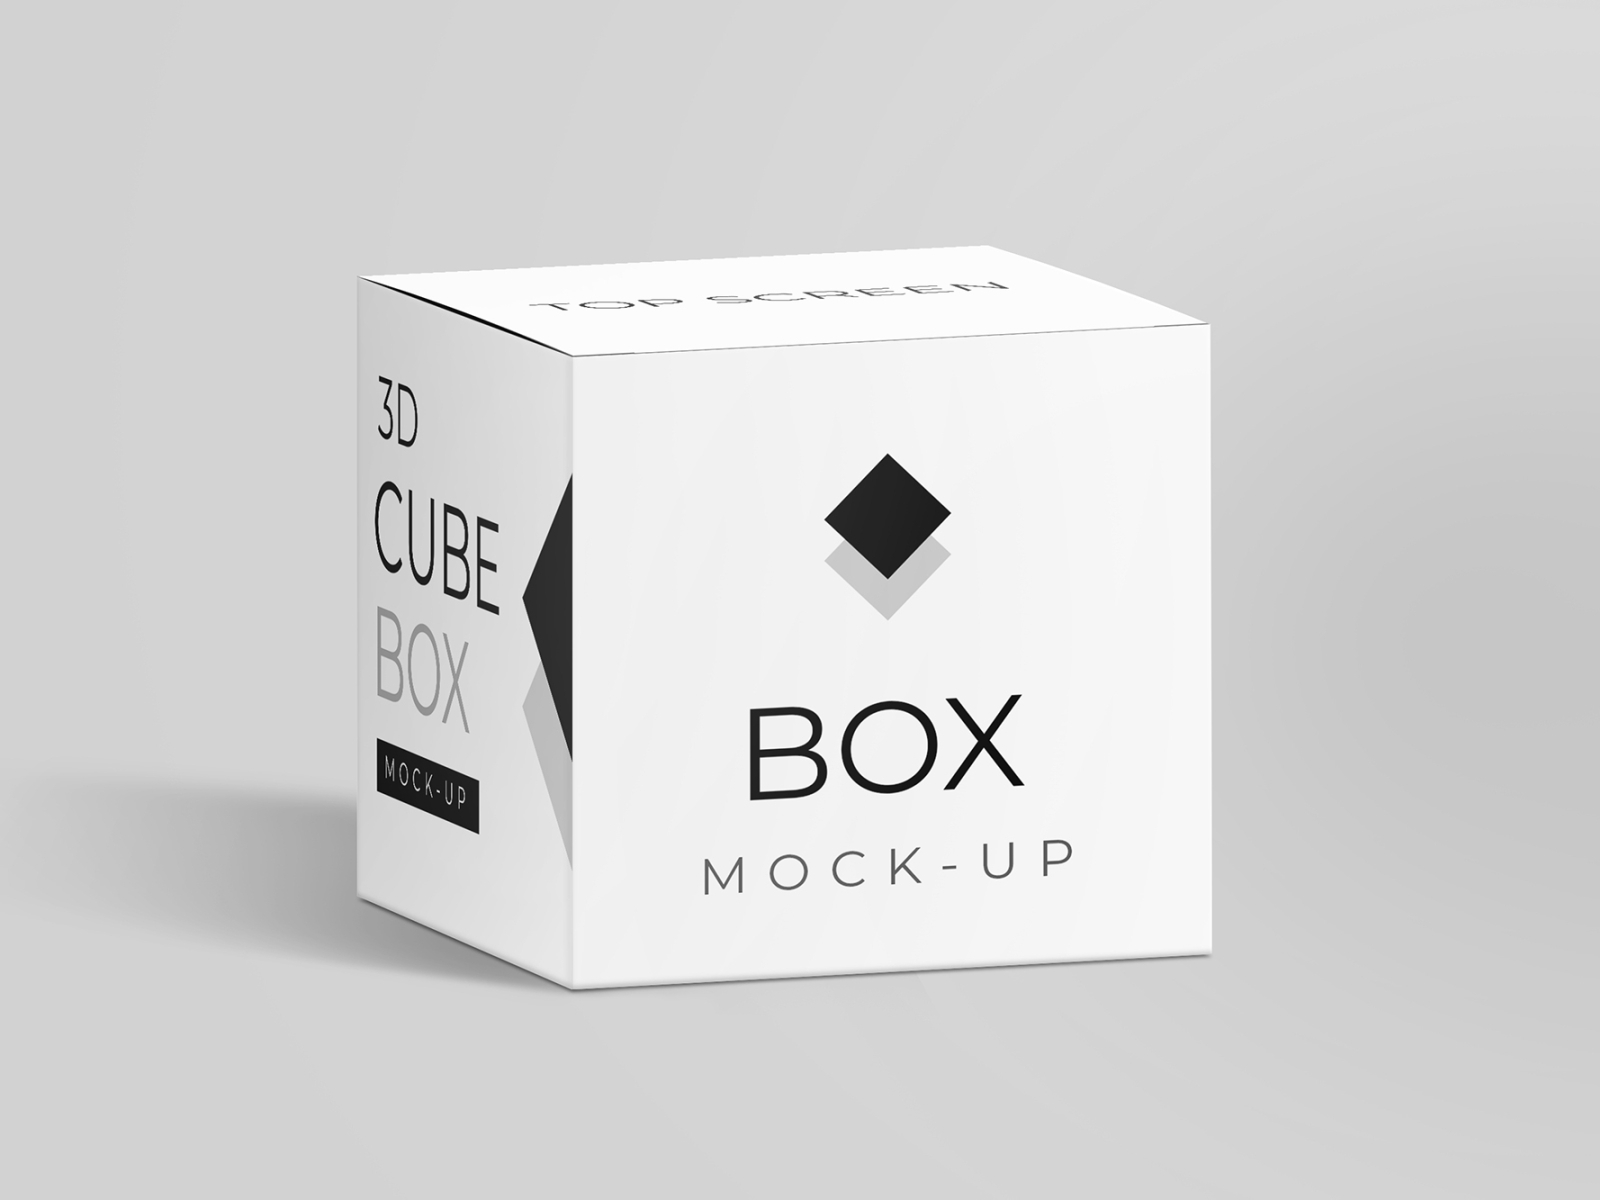 cube-box-mockup-for-packaging-by-graphic-arena-on-dribbble